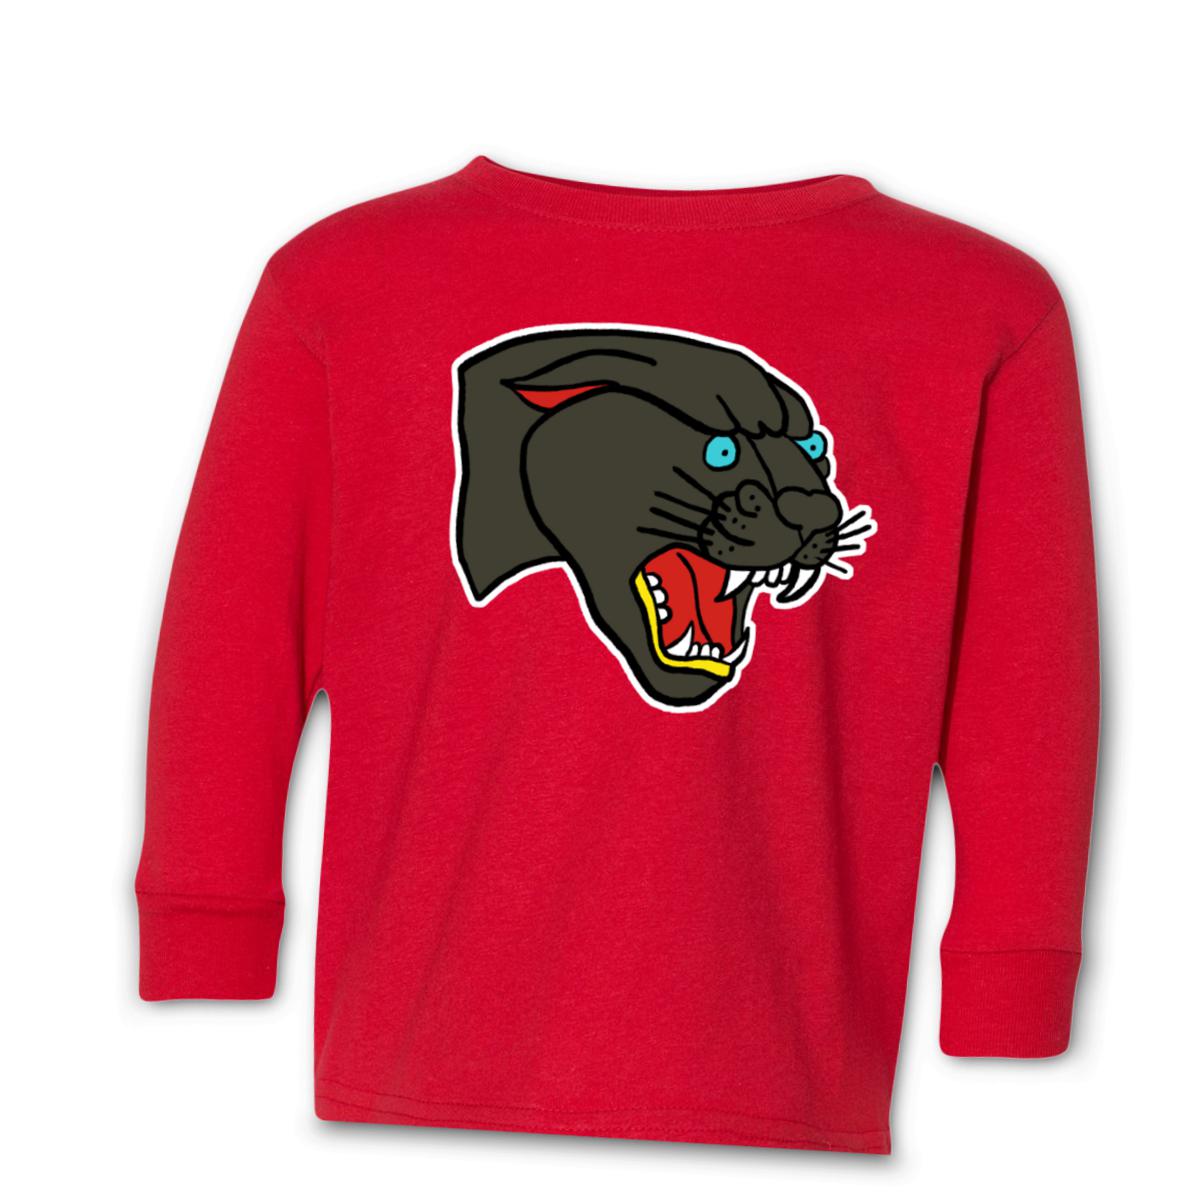 American Traditional Panther Toddler Long Sleeve Tee 2T red